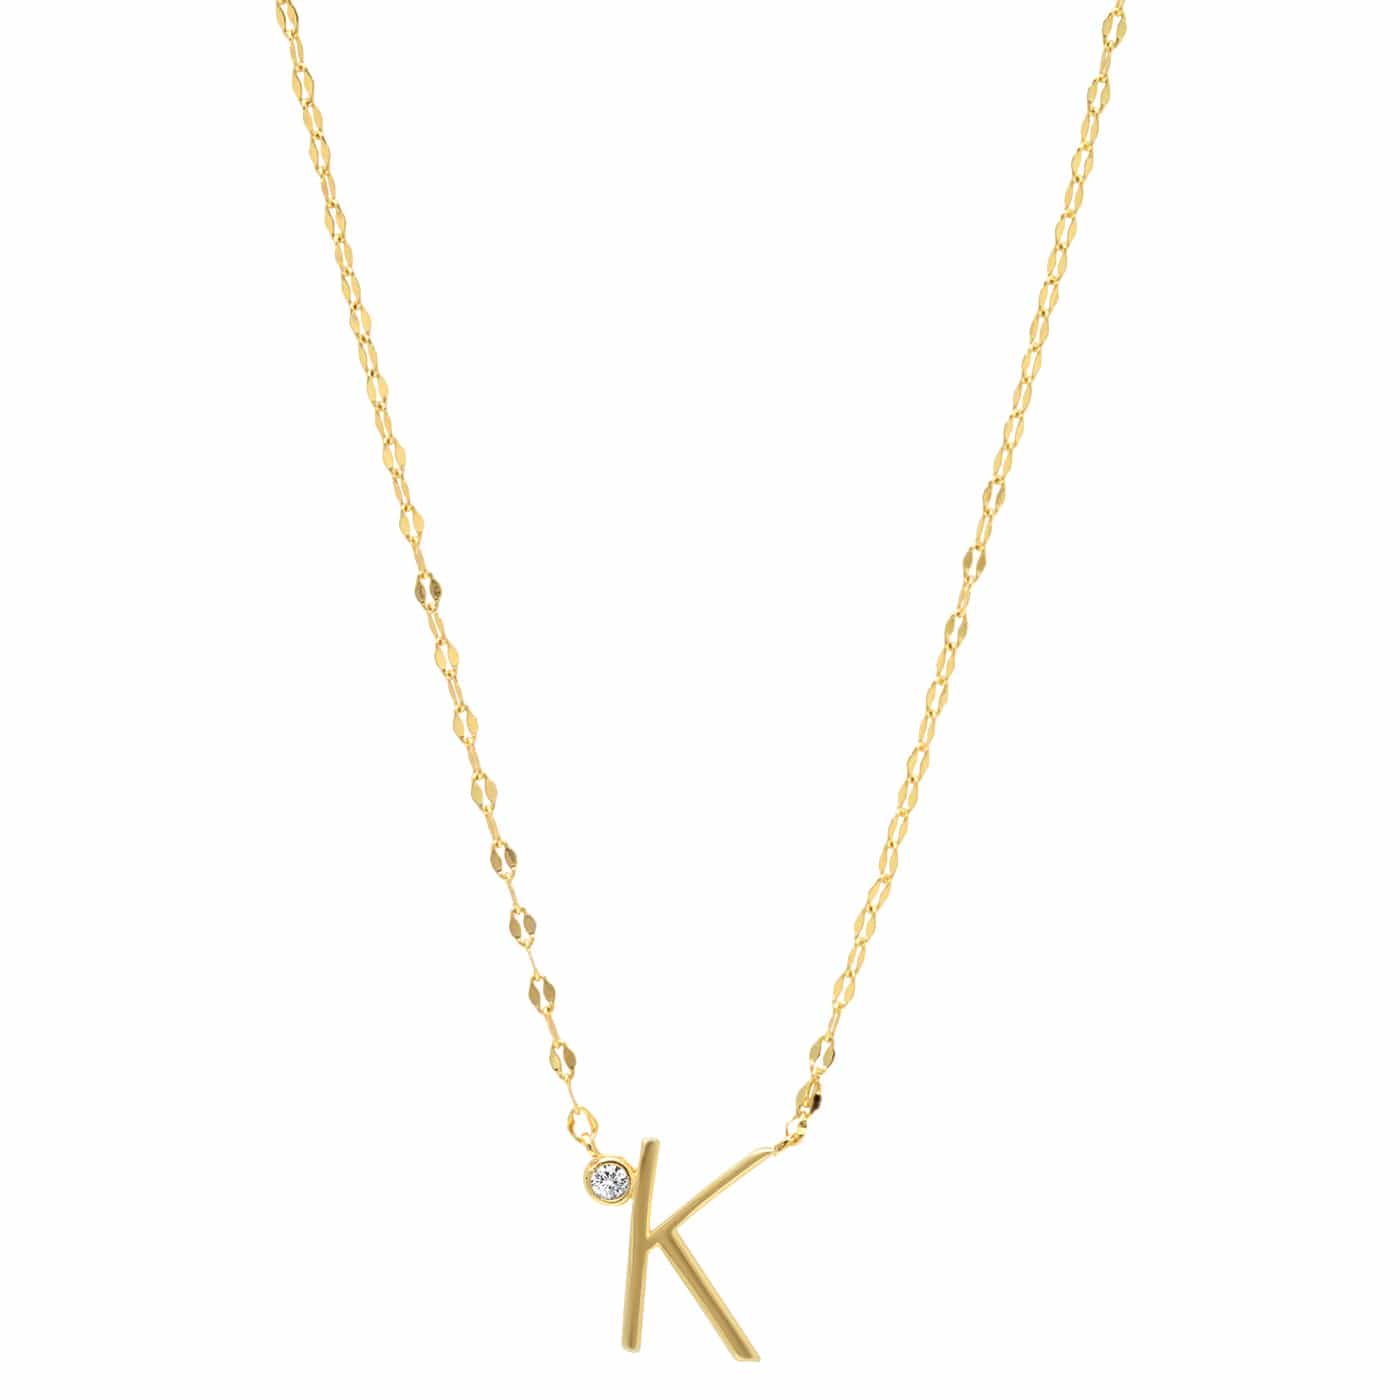 TAI JEWELRY Necklace K Medium Sized Initial Necklace With Cz Accent